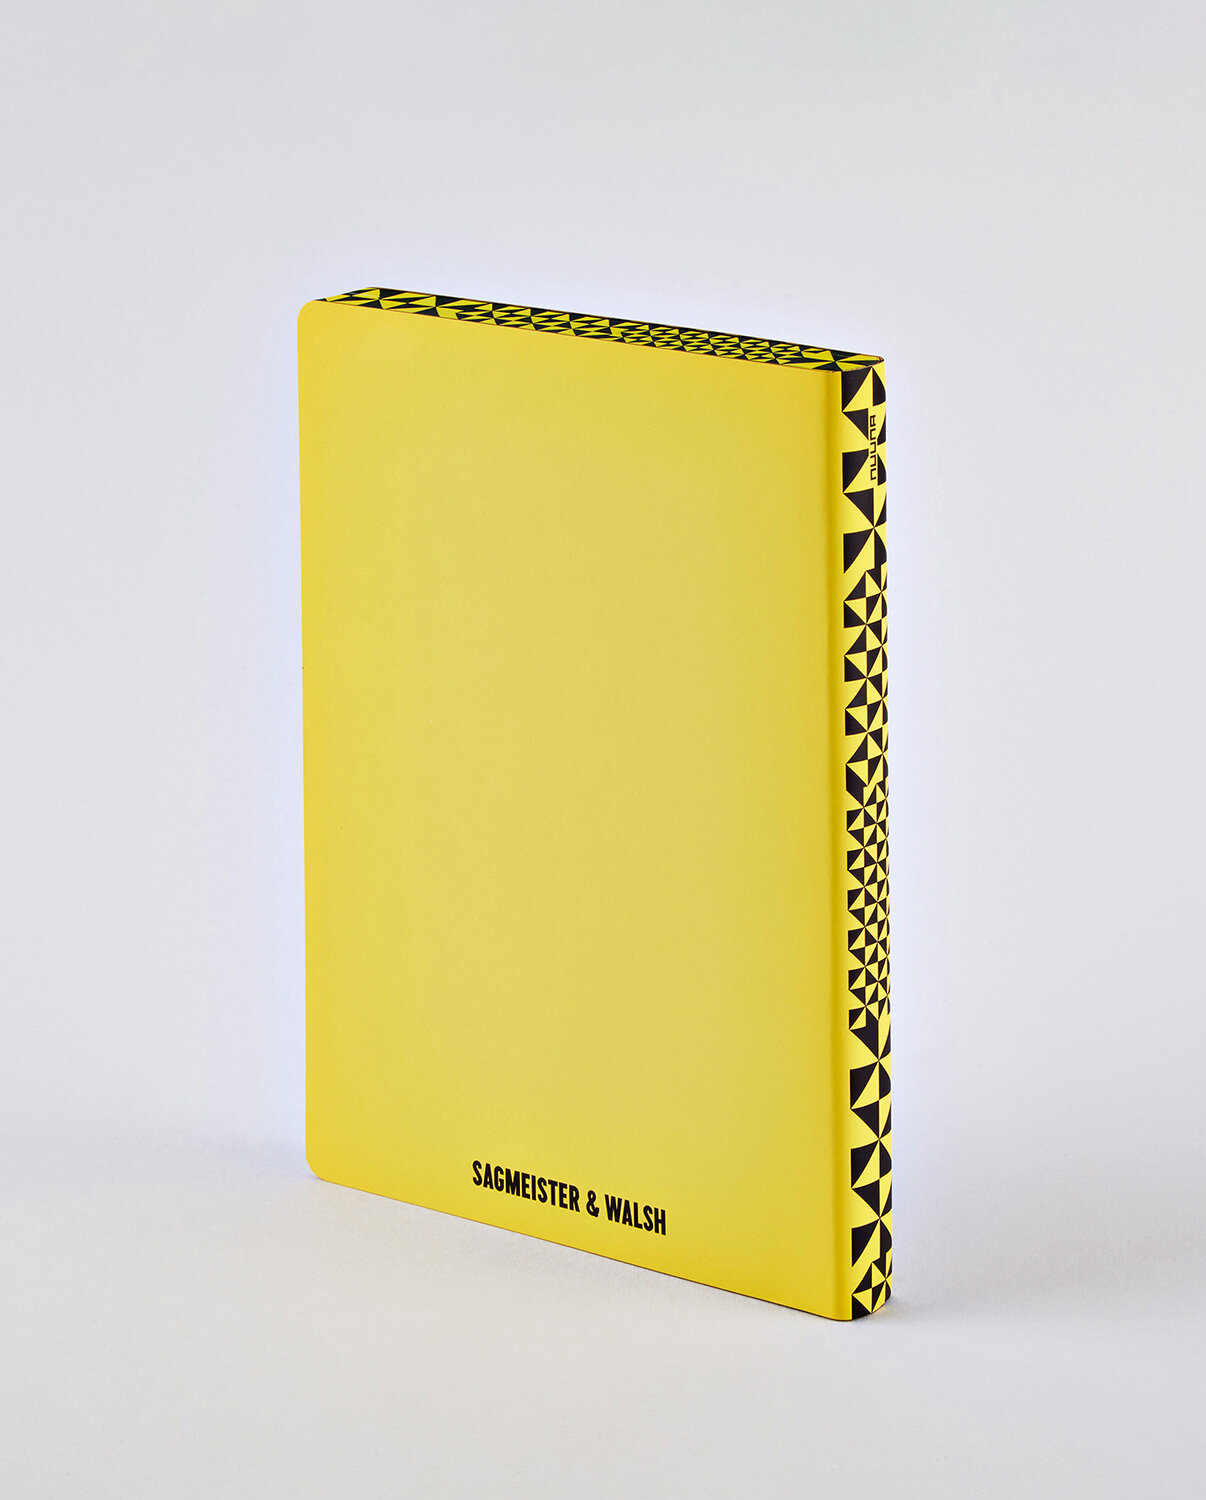 NUUNA Notizbuch Graphic L THE HAPPY BOOK BY STEFAN SAGMEISTER,  165 × 220 mm  